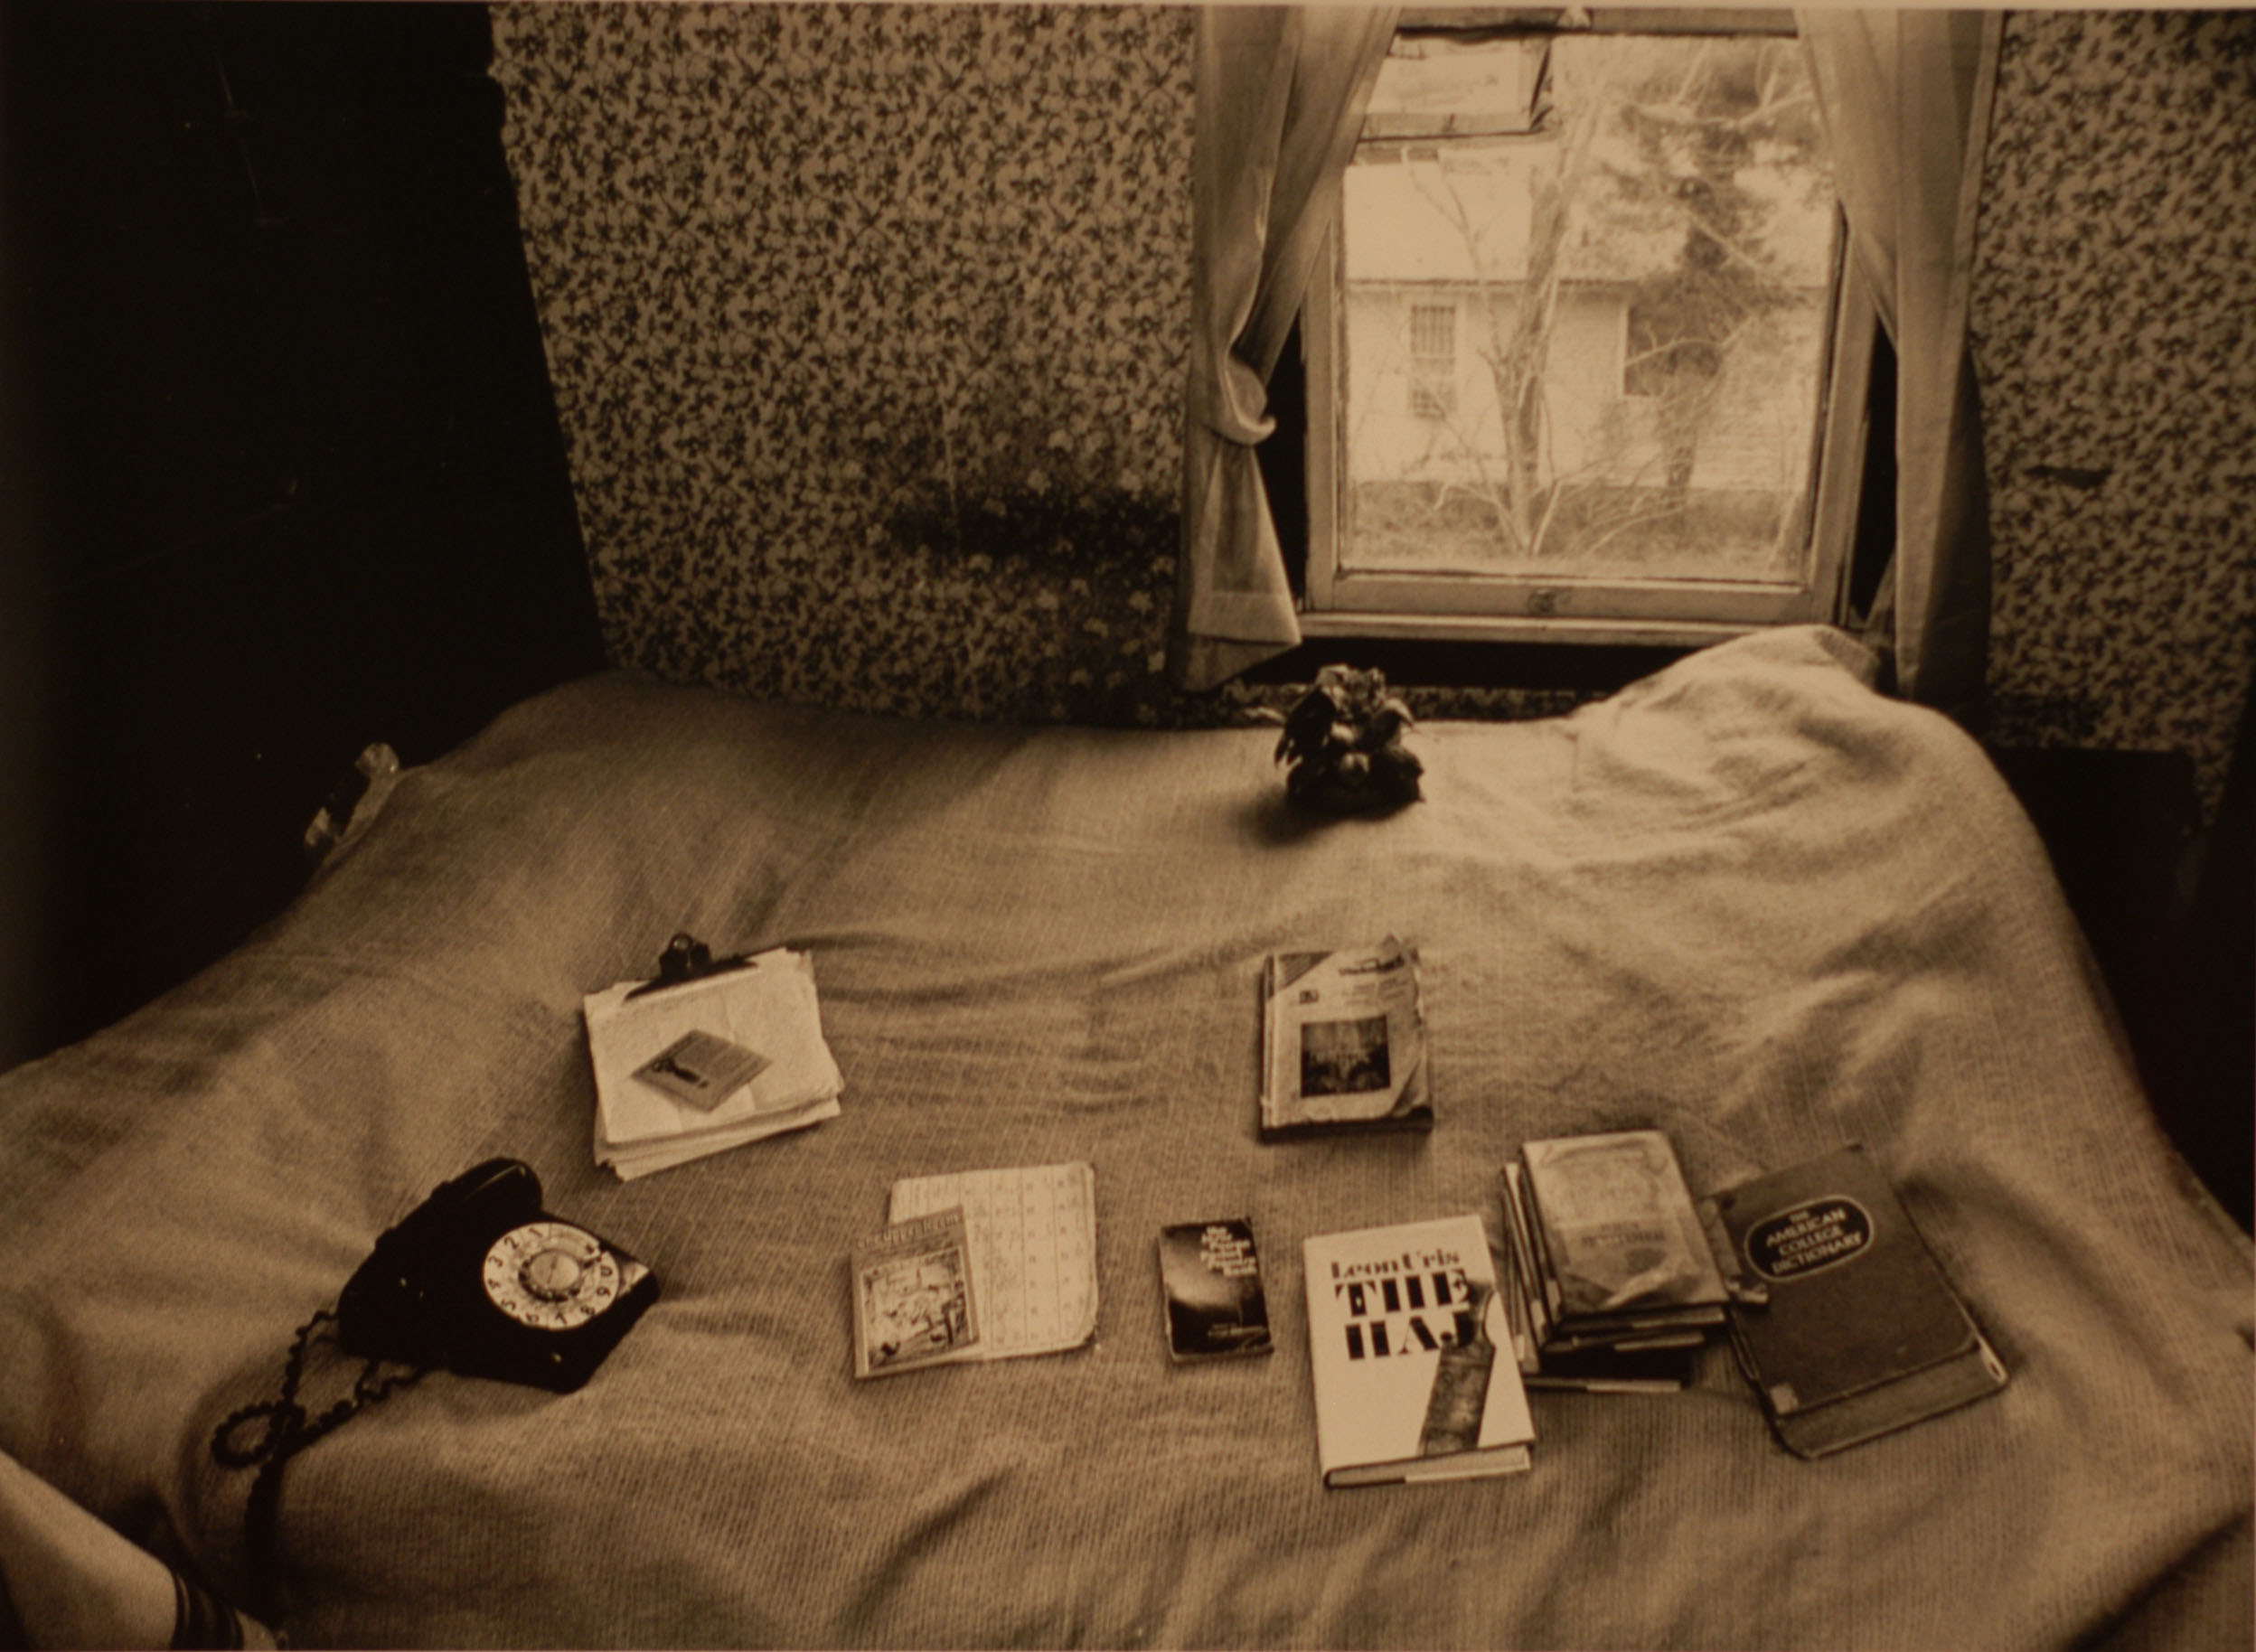 Her bed filed with reading materials